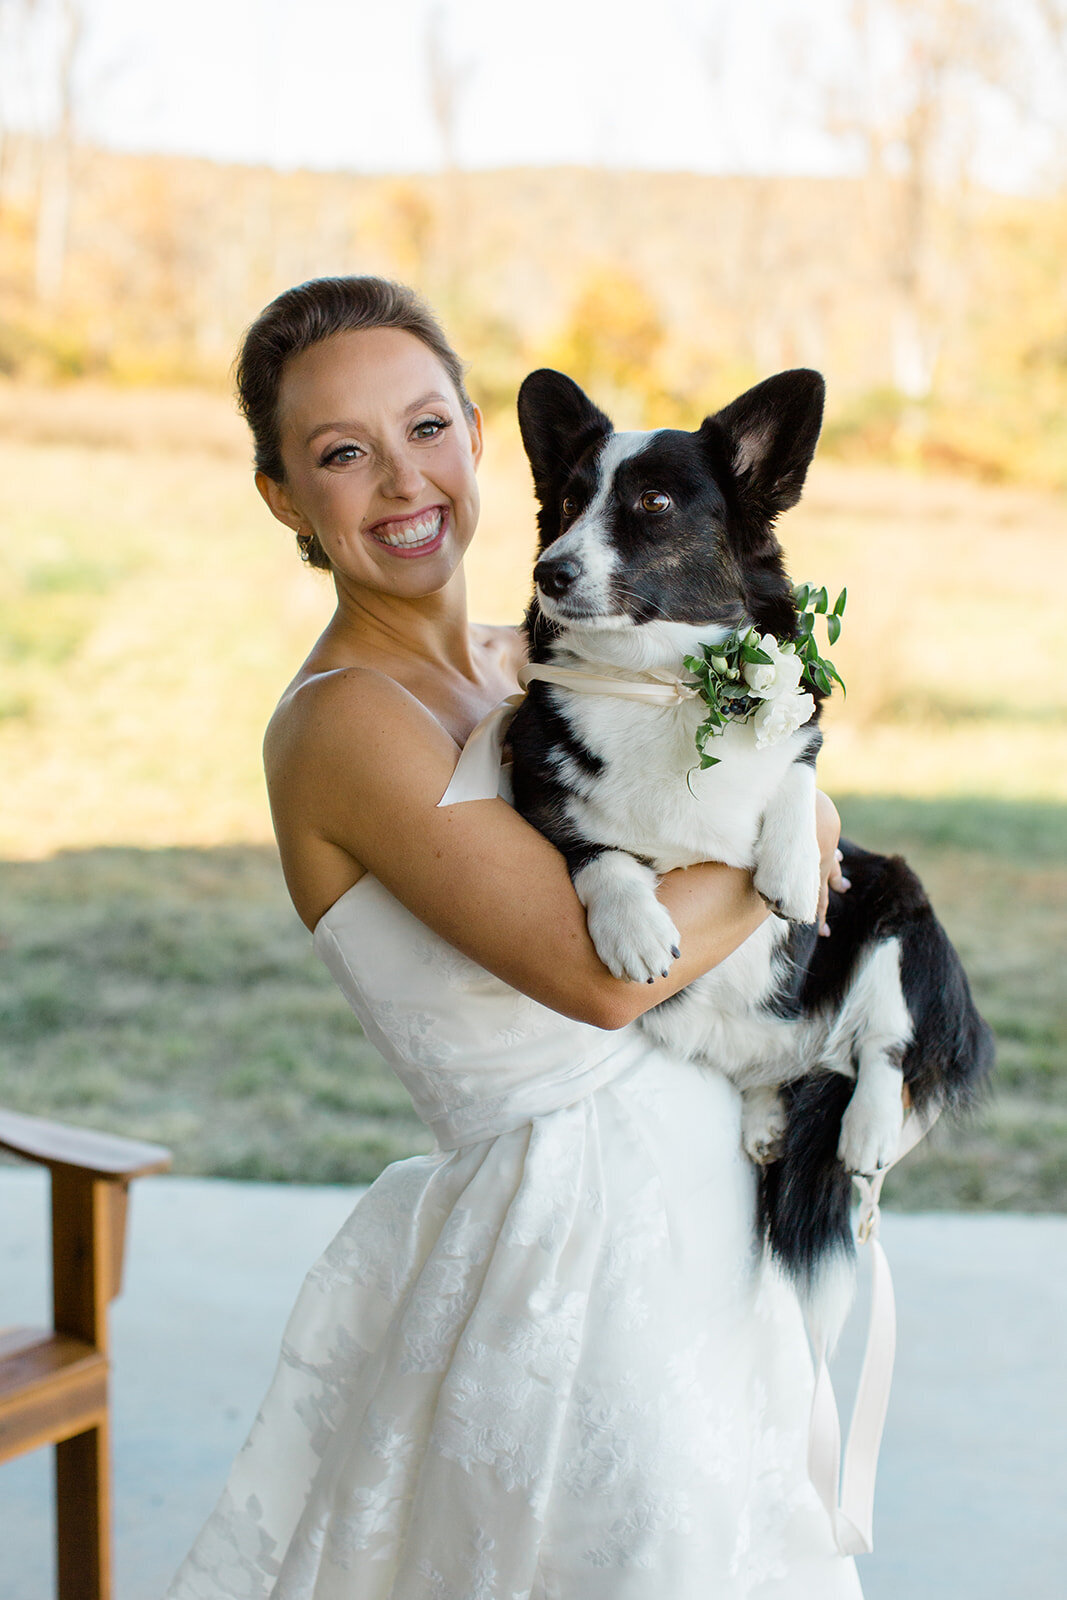 Bride smiling while carrying her dog